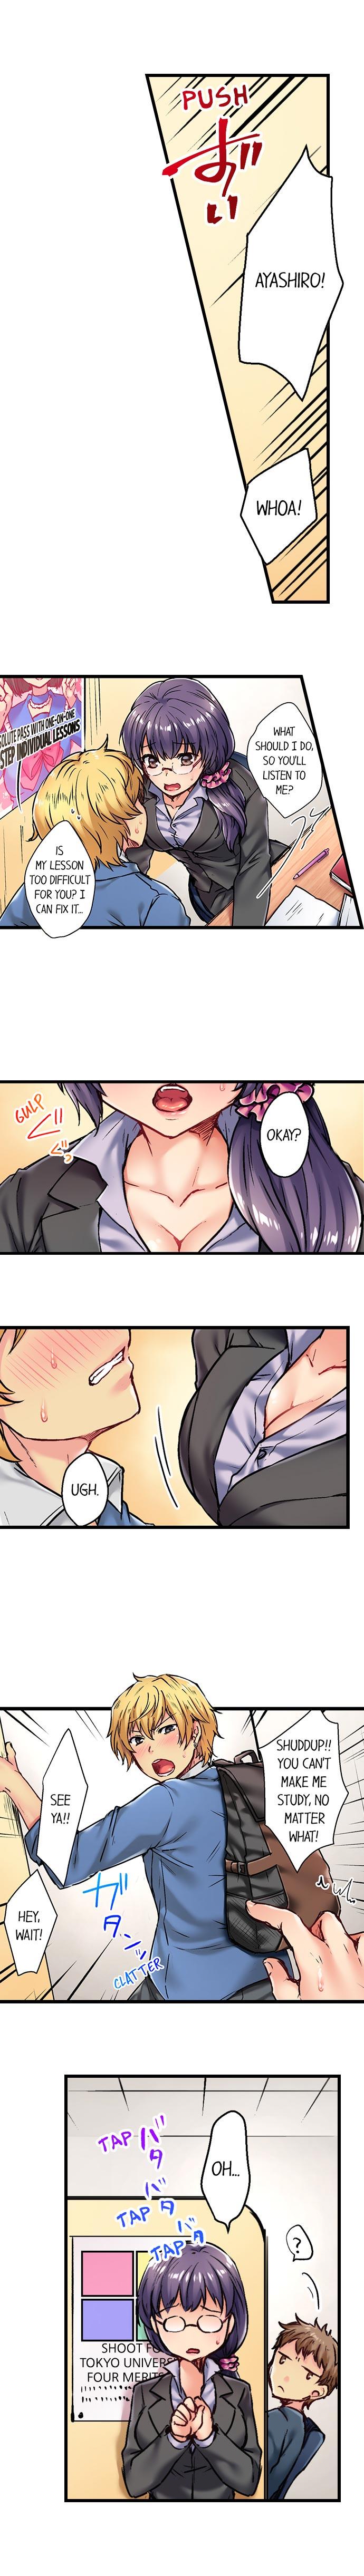 Spying Rewarding My Student with Sex Ch.6/? Punk - Page 4